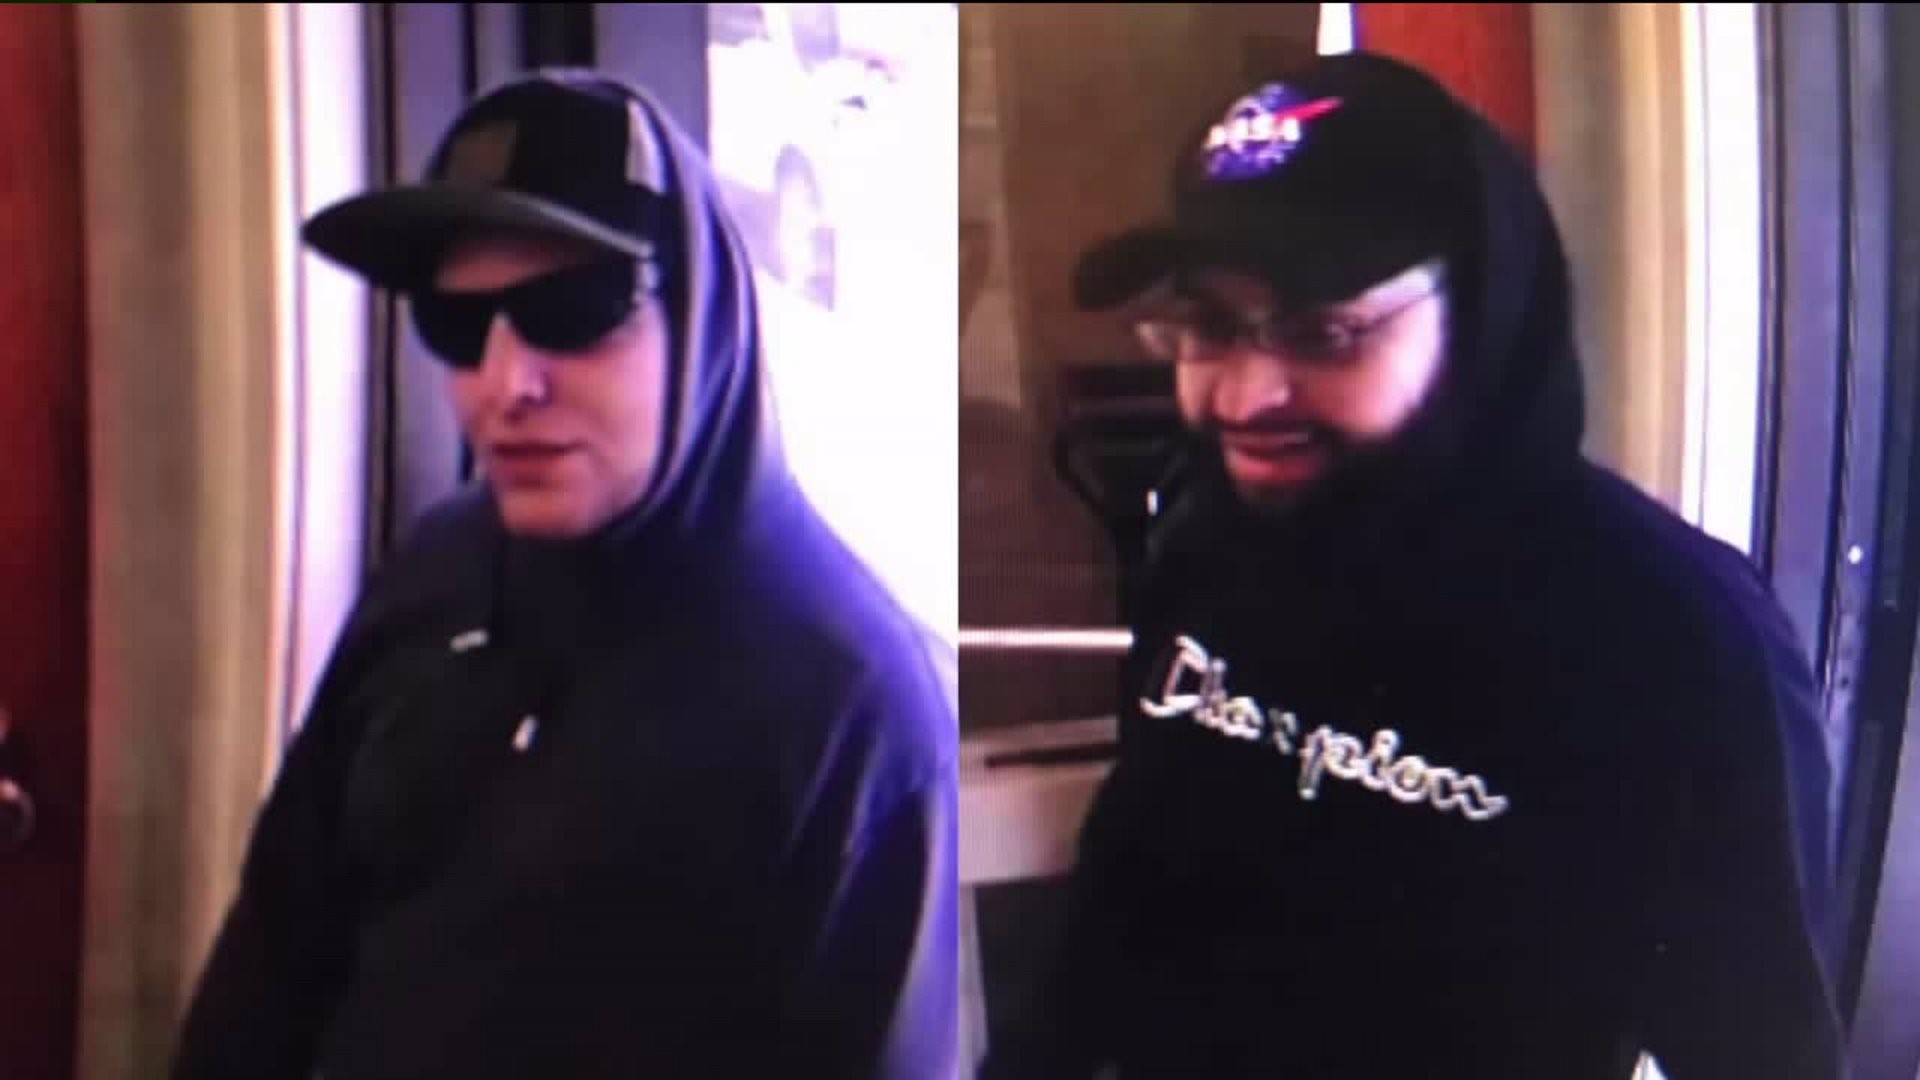 Scranton Police Searching for Robbery Suspects in Surveillance Photos